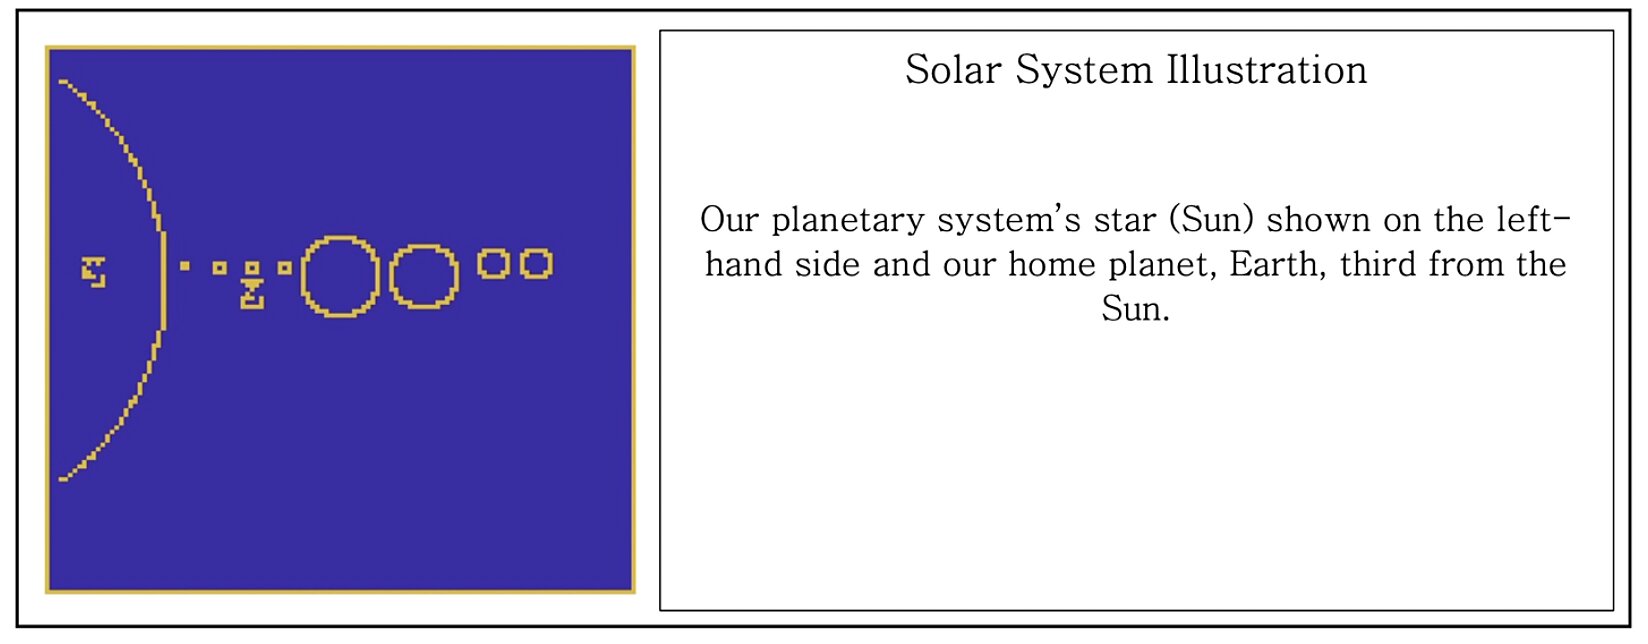 The Solar System and our location. Credit: J.H. Jiang et al., 2022